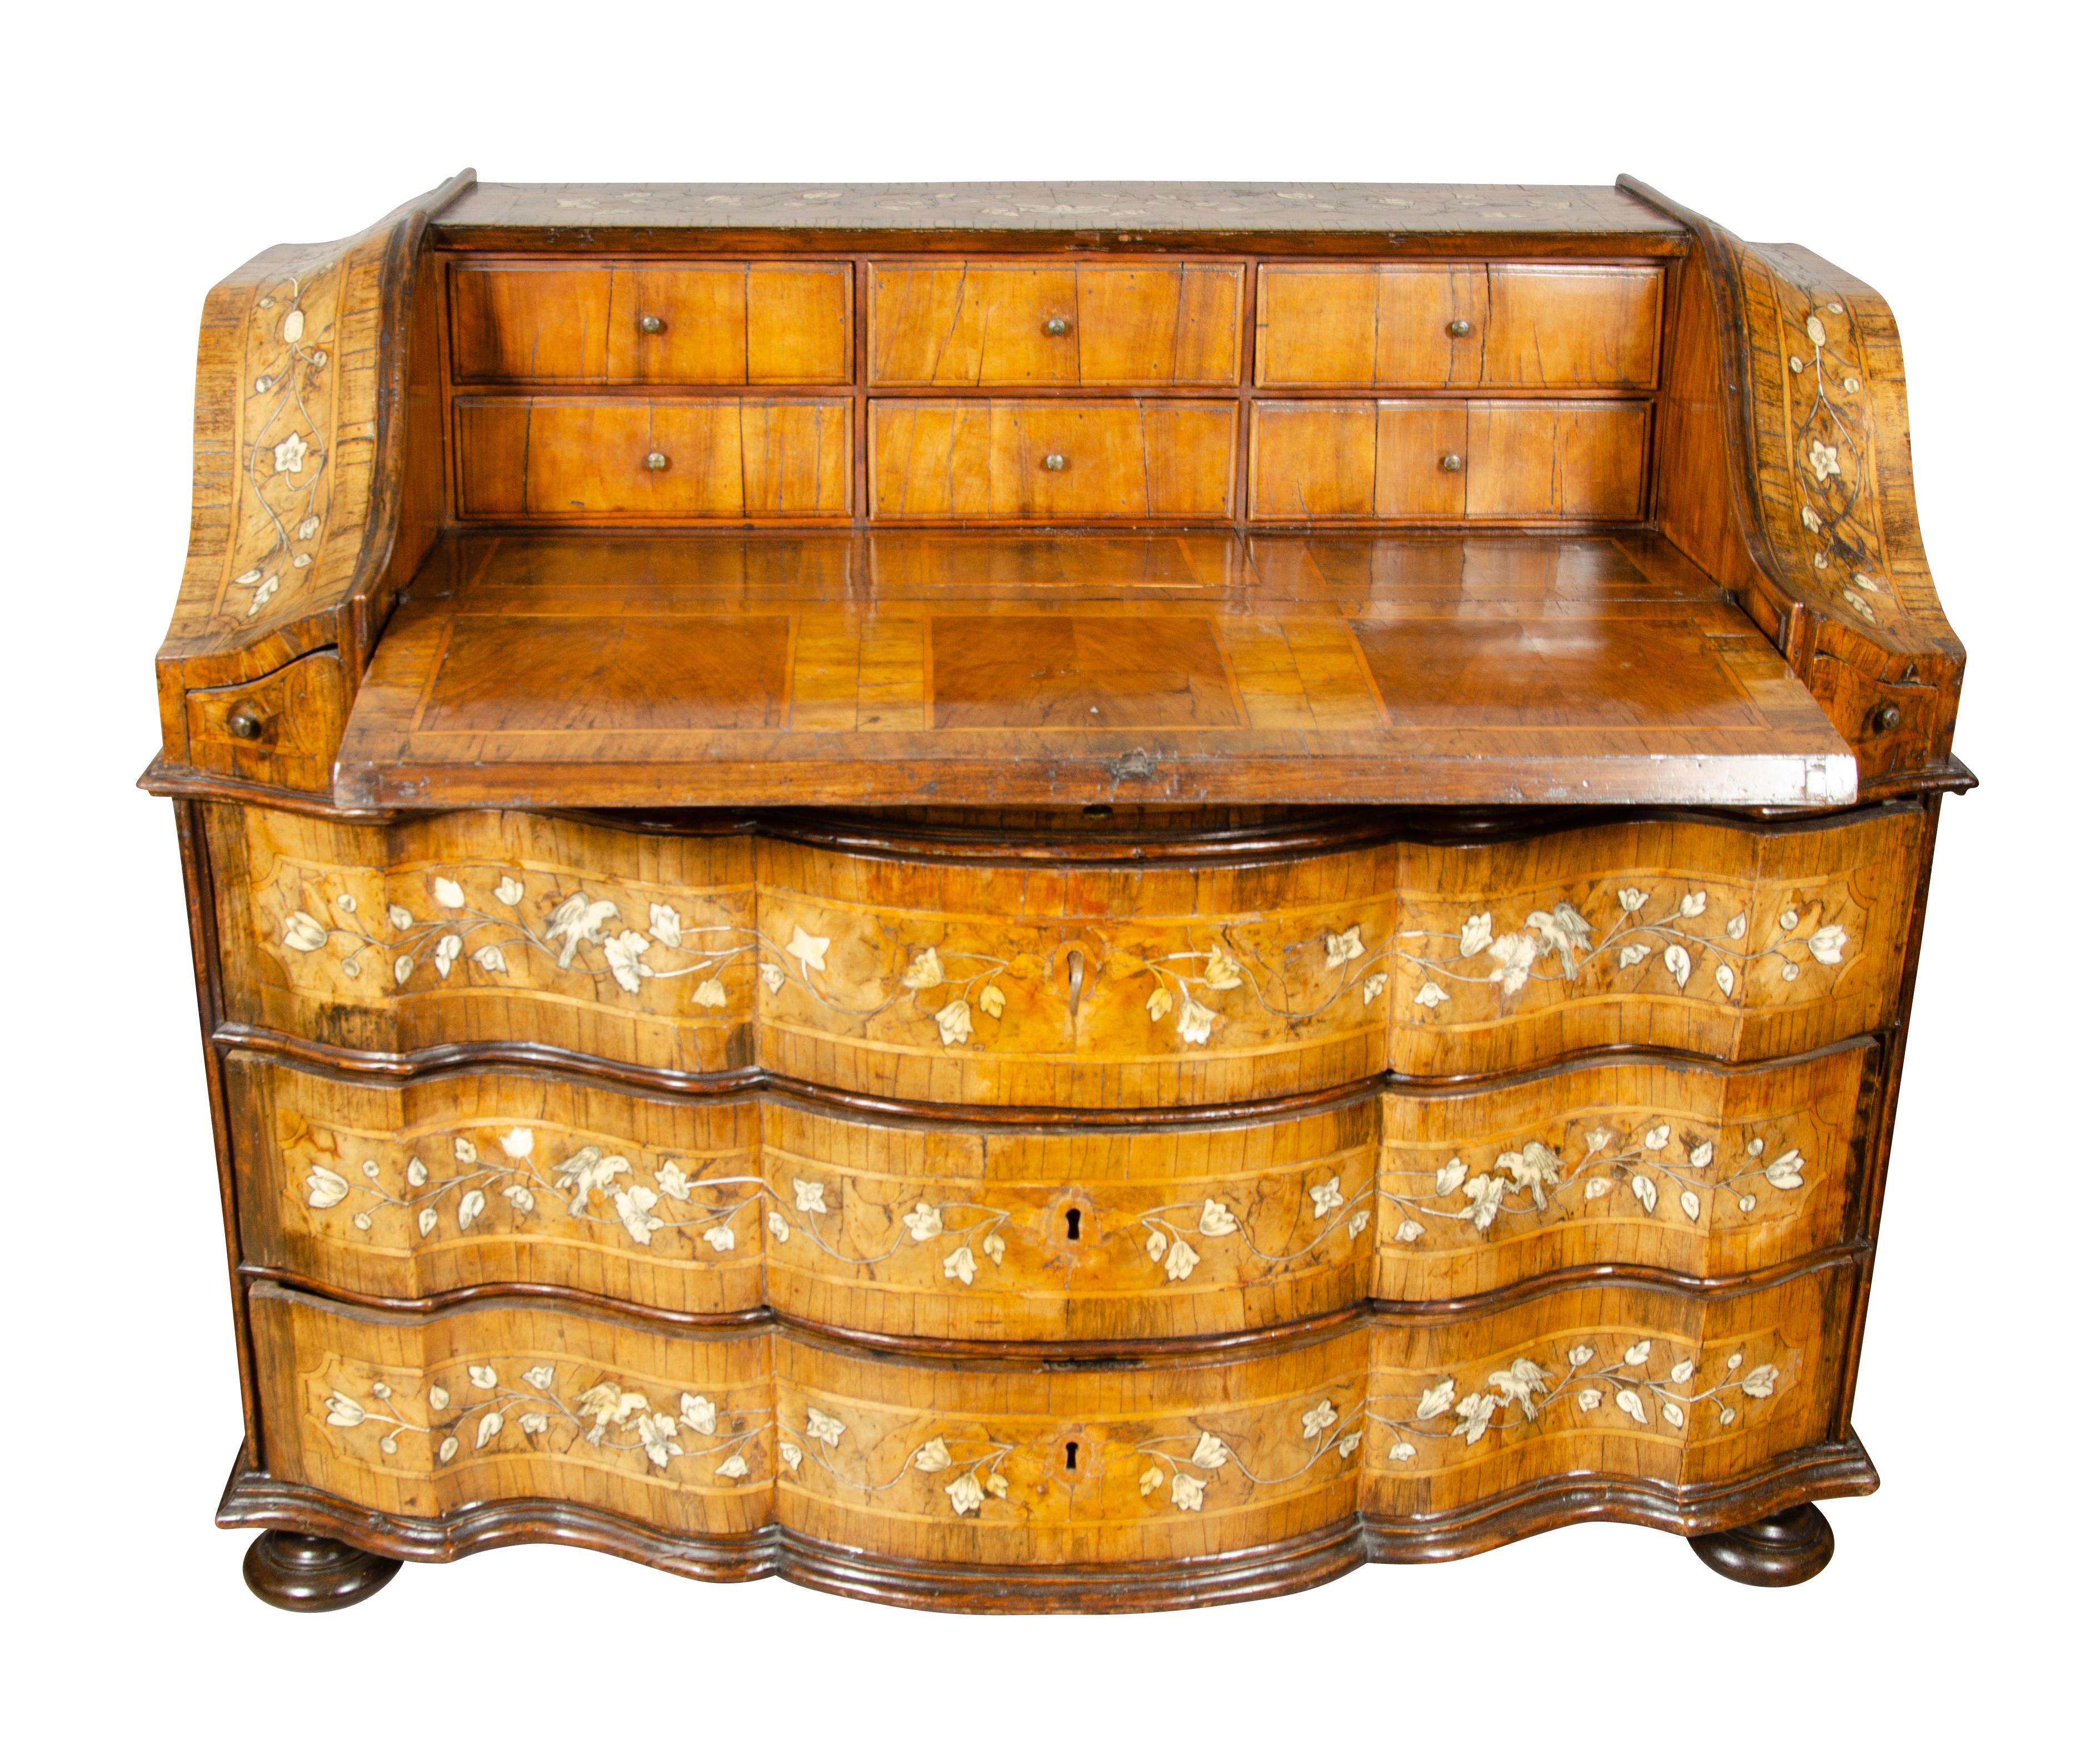 An impressive piece recently purchased from a local family that had it for many years and had inherited it from their grandparents. With rectangular top decorated with trailing flowers and birds over a serpentine slant lid desk section inlaid with